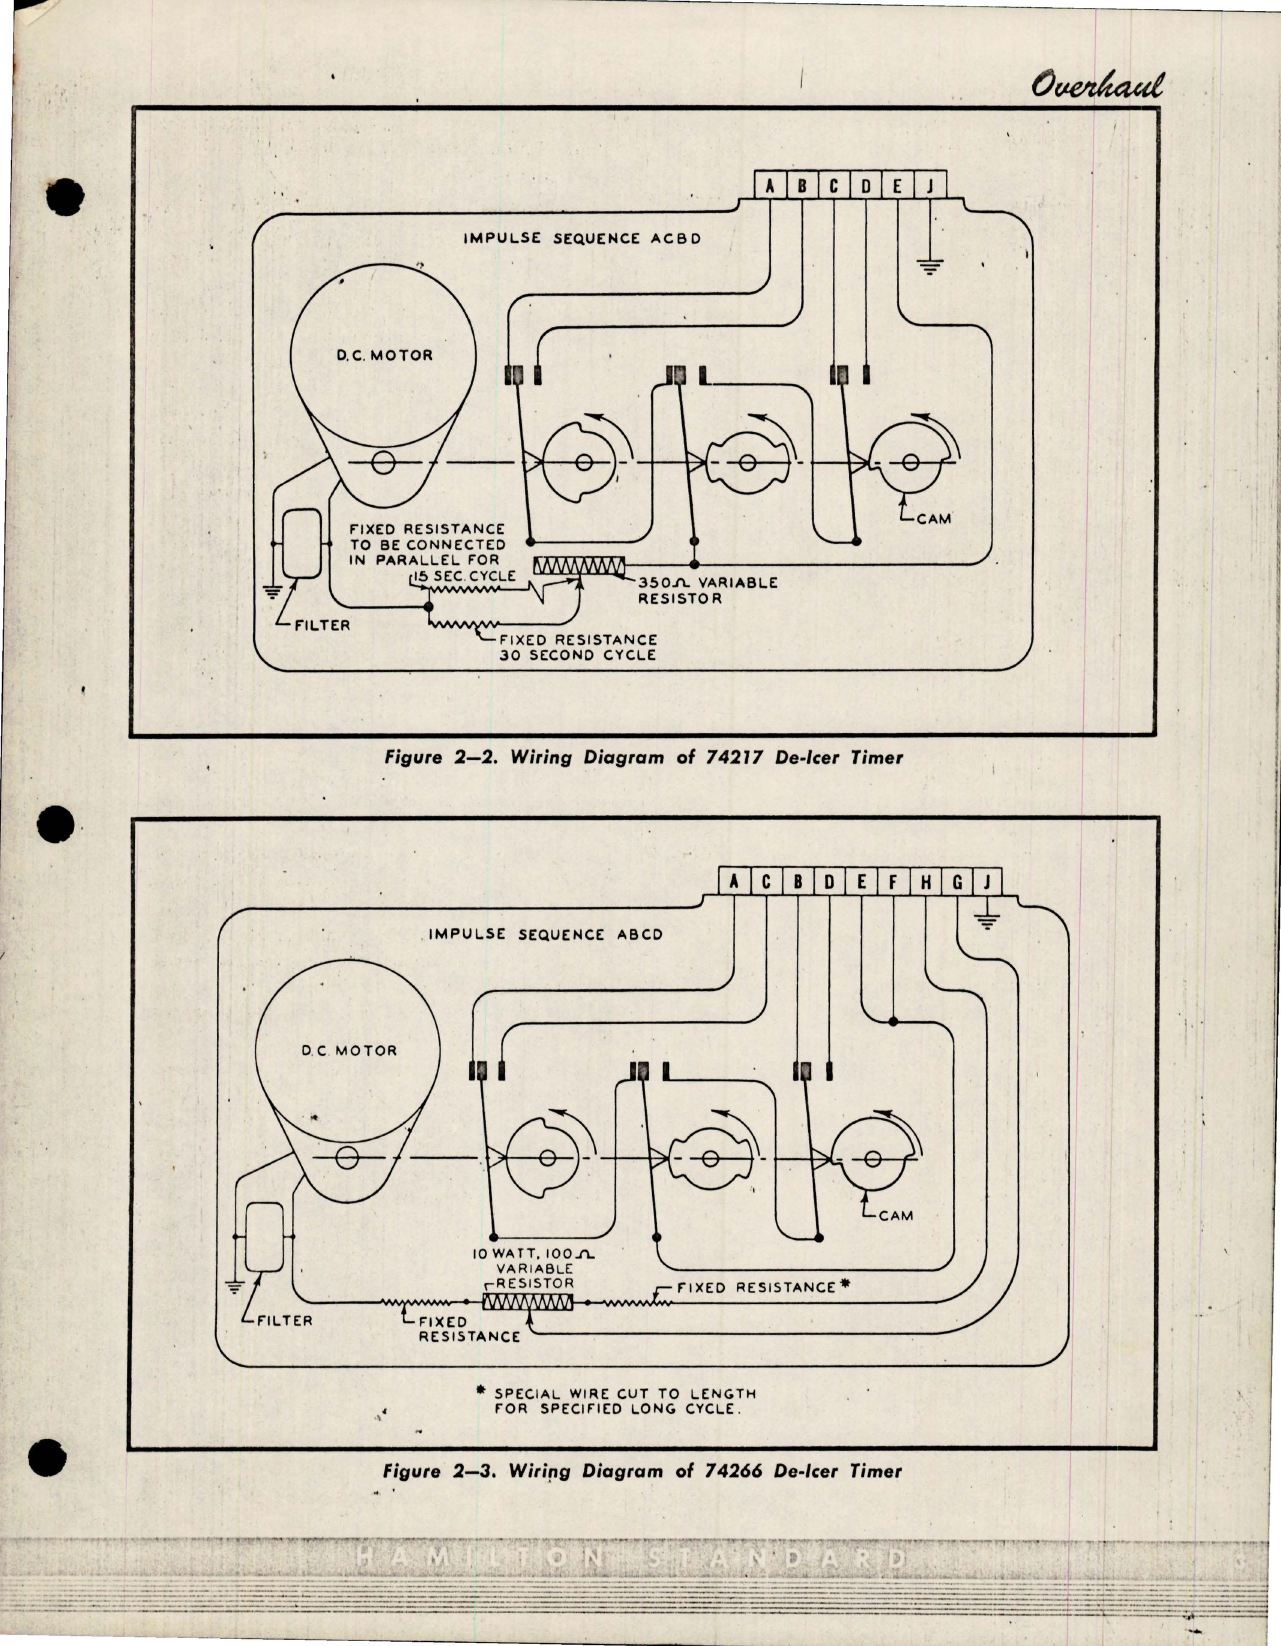 Sample page 7 from AirCorps Library document: Overhaul Manual w Parts for Electric De-Icer Timers - Models 74217 and 74266 